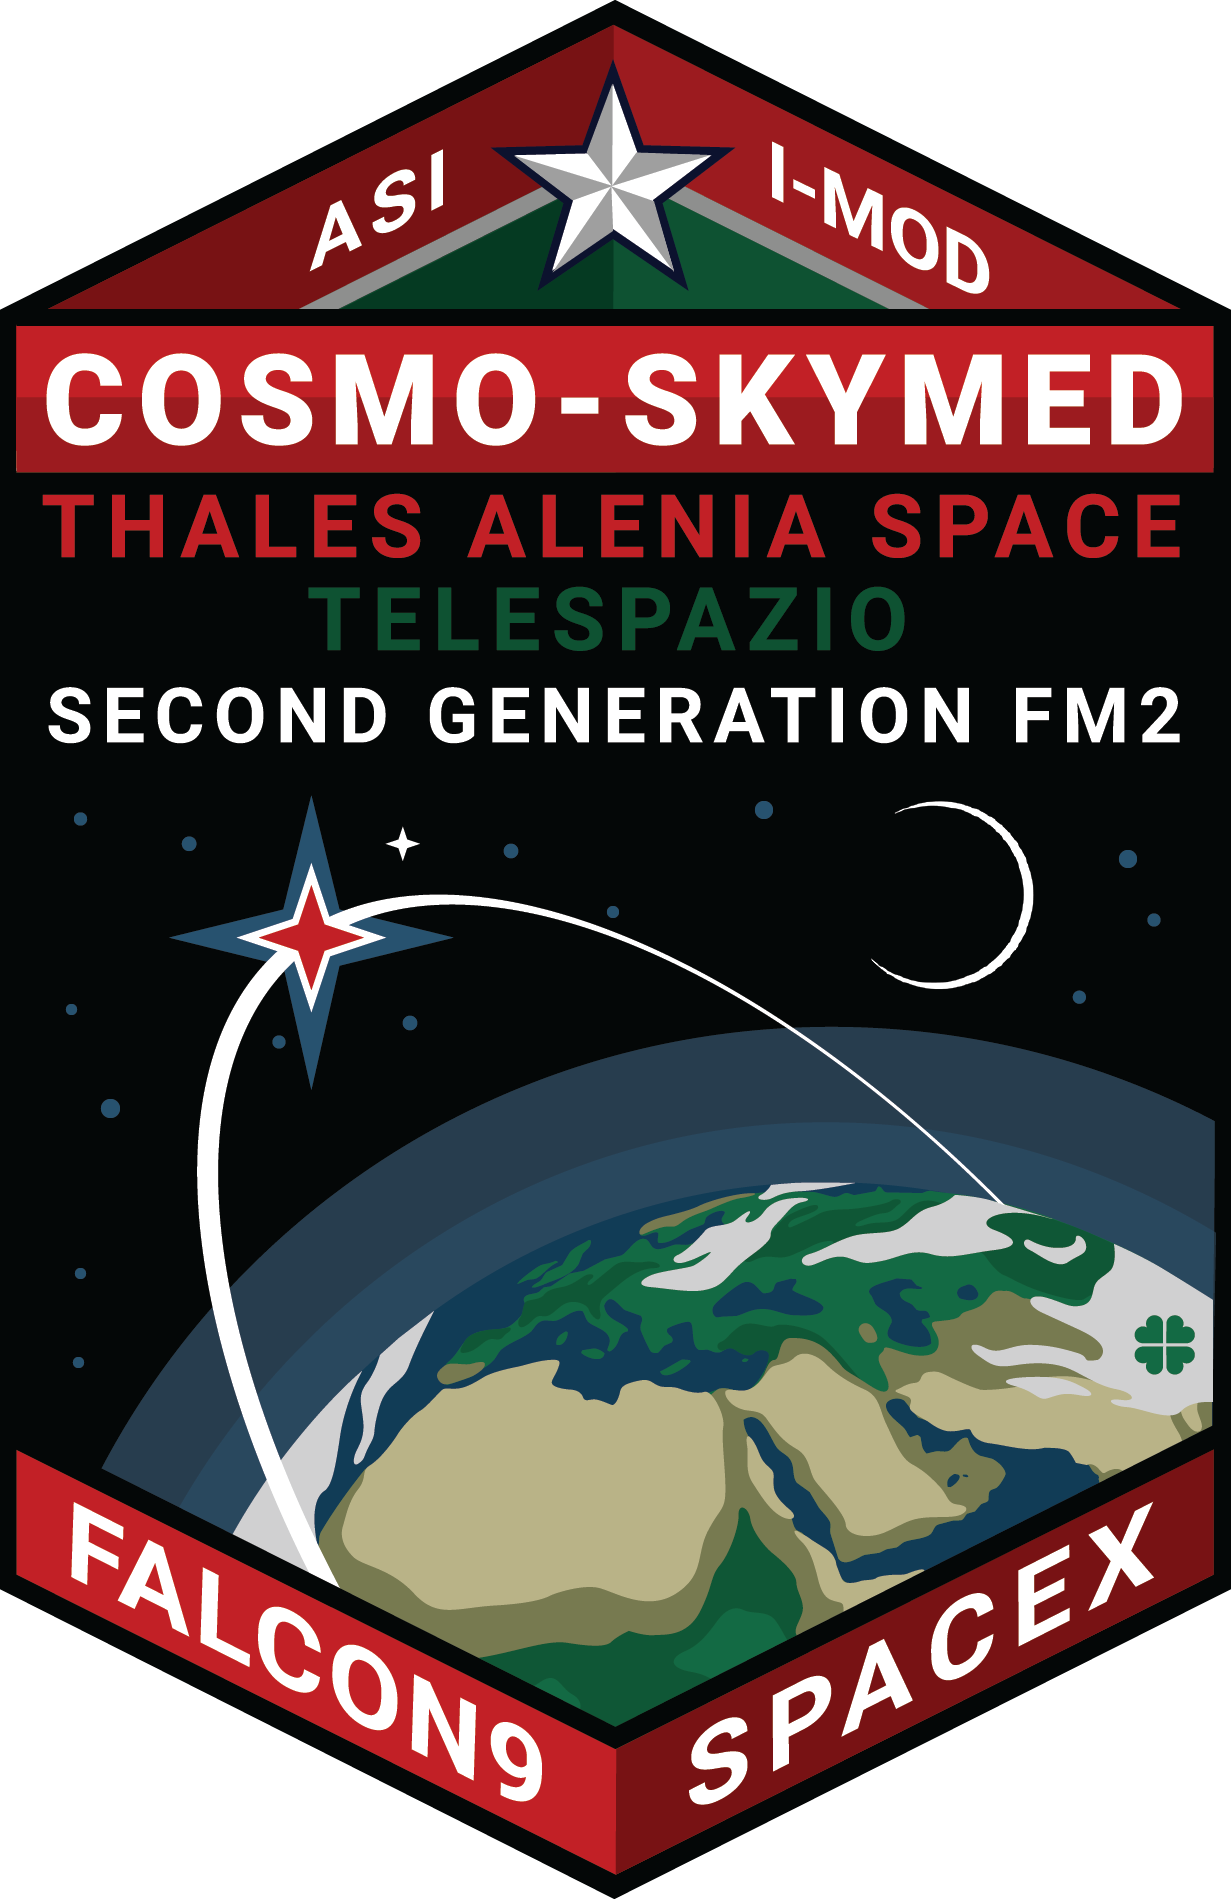 Mission patch for CSG-2